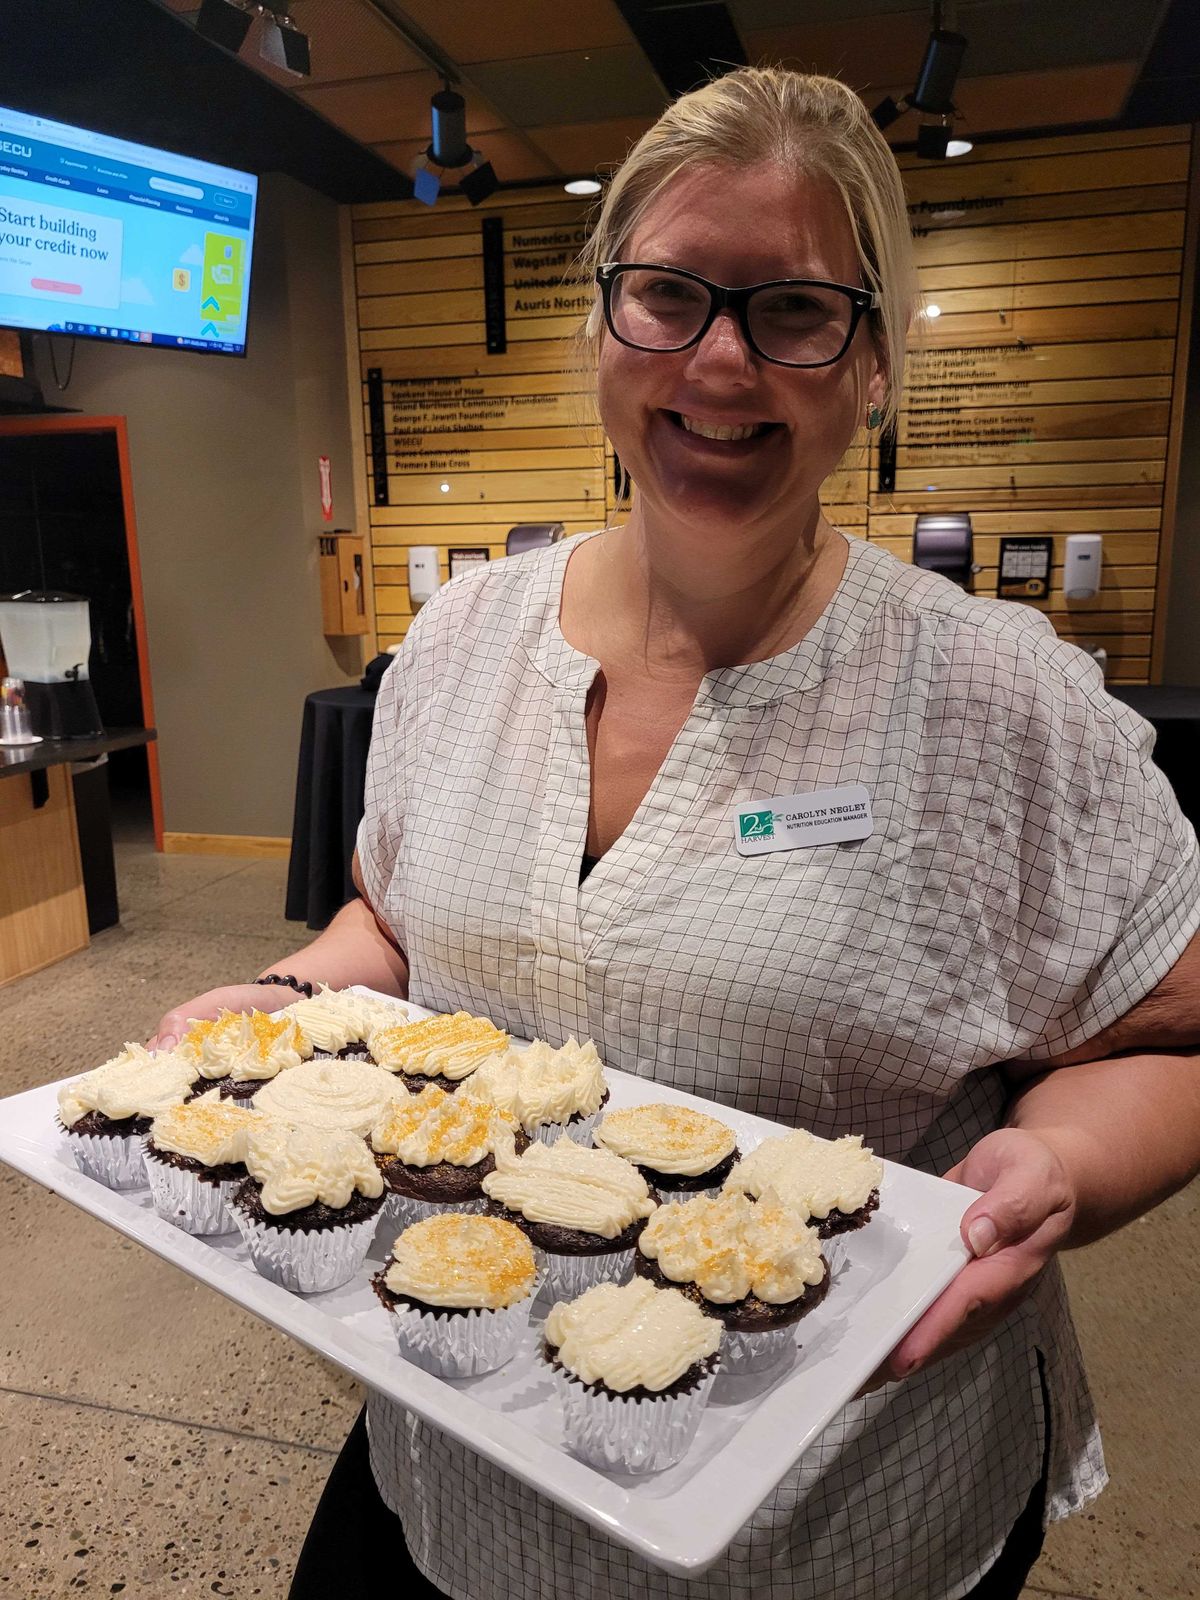 {span}Carolyn Negley, RD, holds a tray of cupcakes.{/span}  (Courtesy of Carolyn Negley)